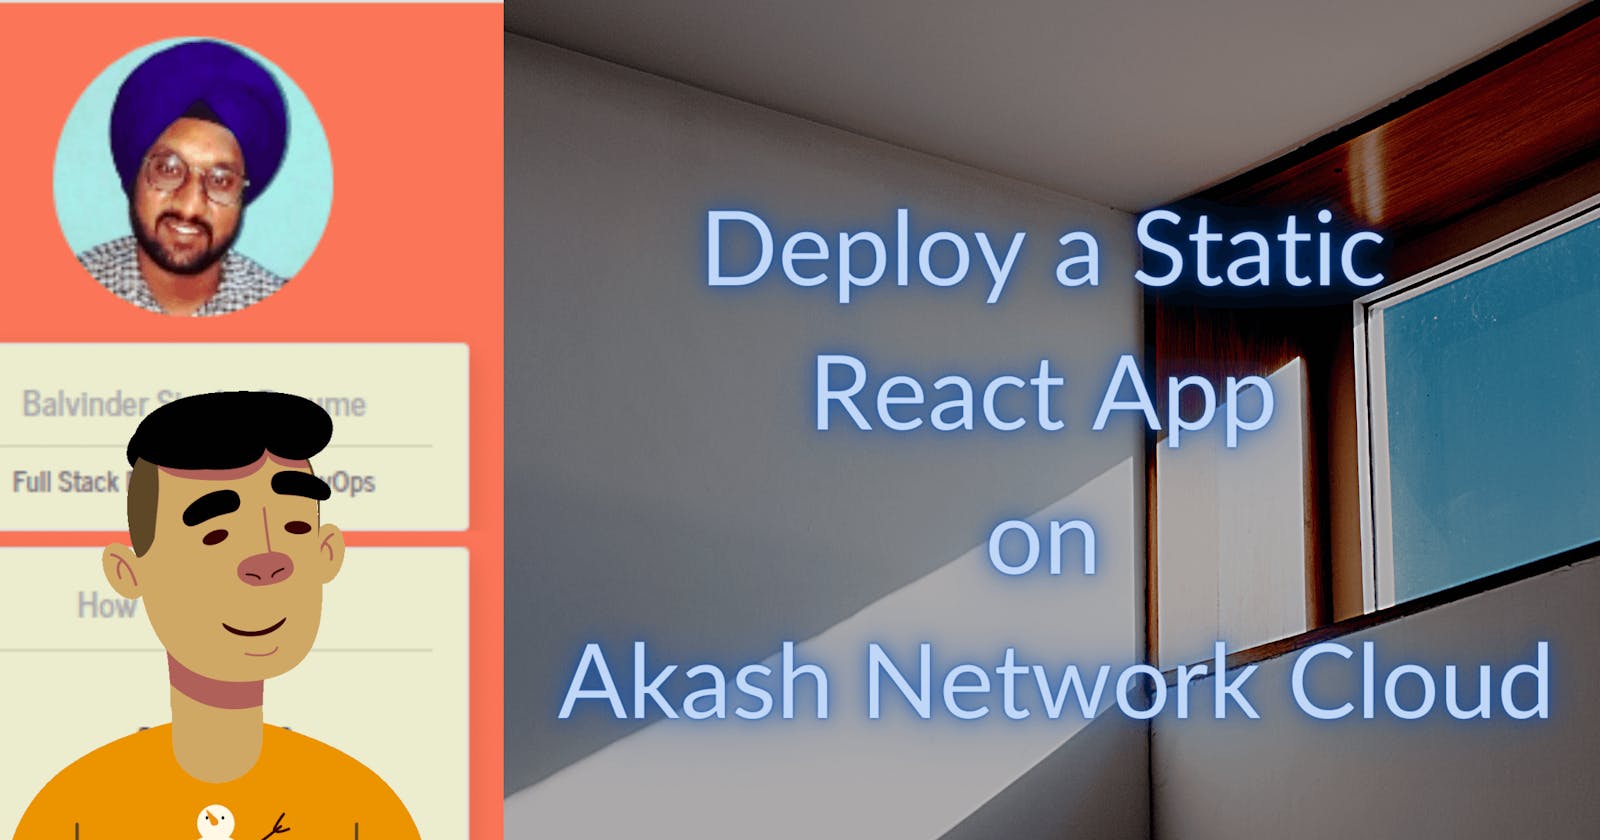 A guide to deploying a Static React App on Akash Network Cloud | Tekraze